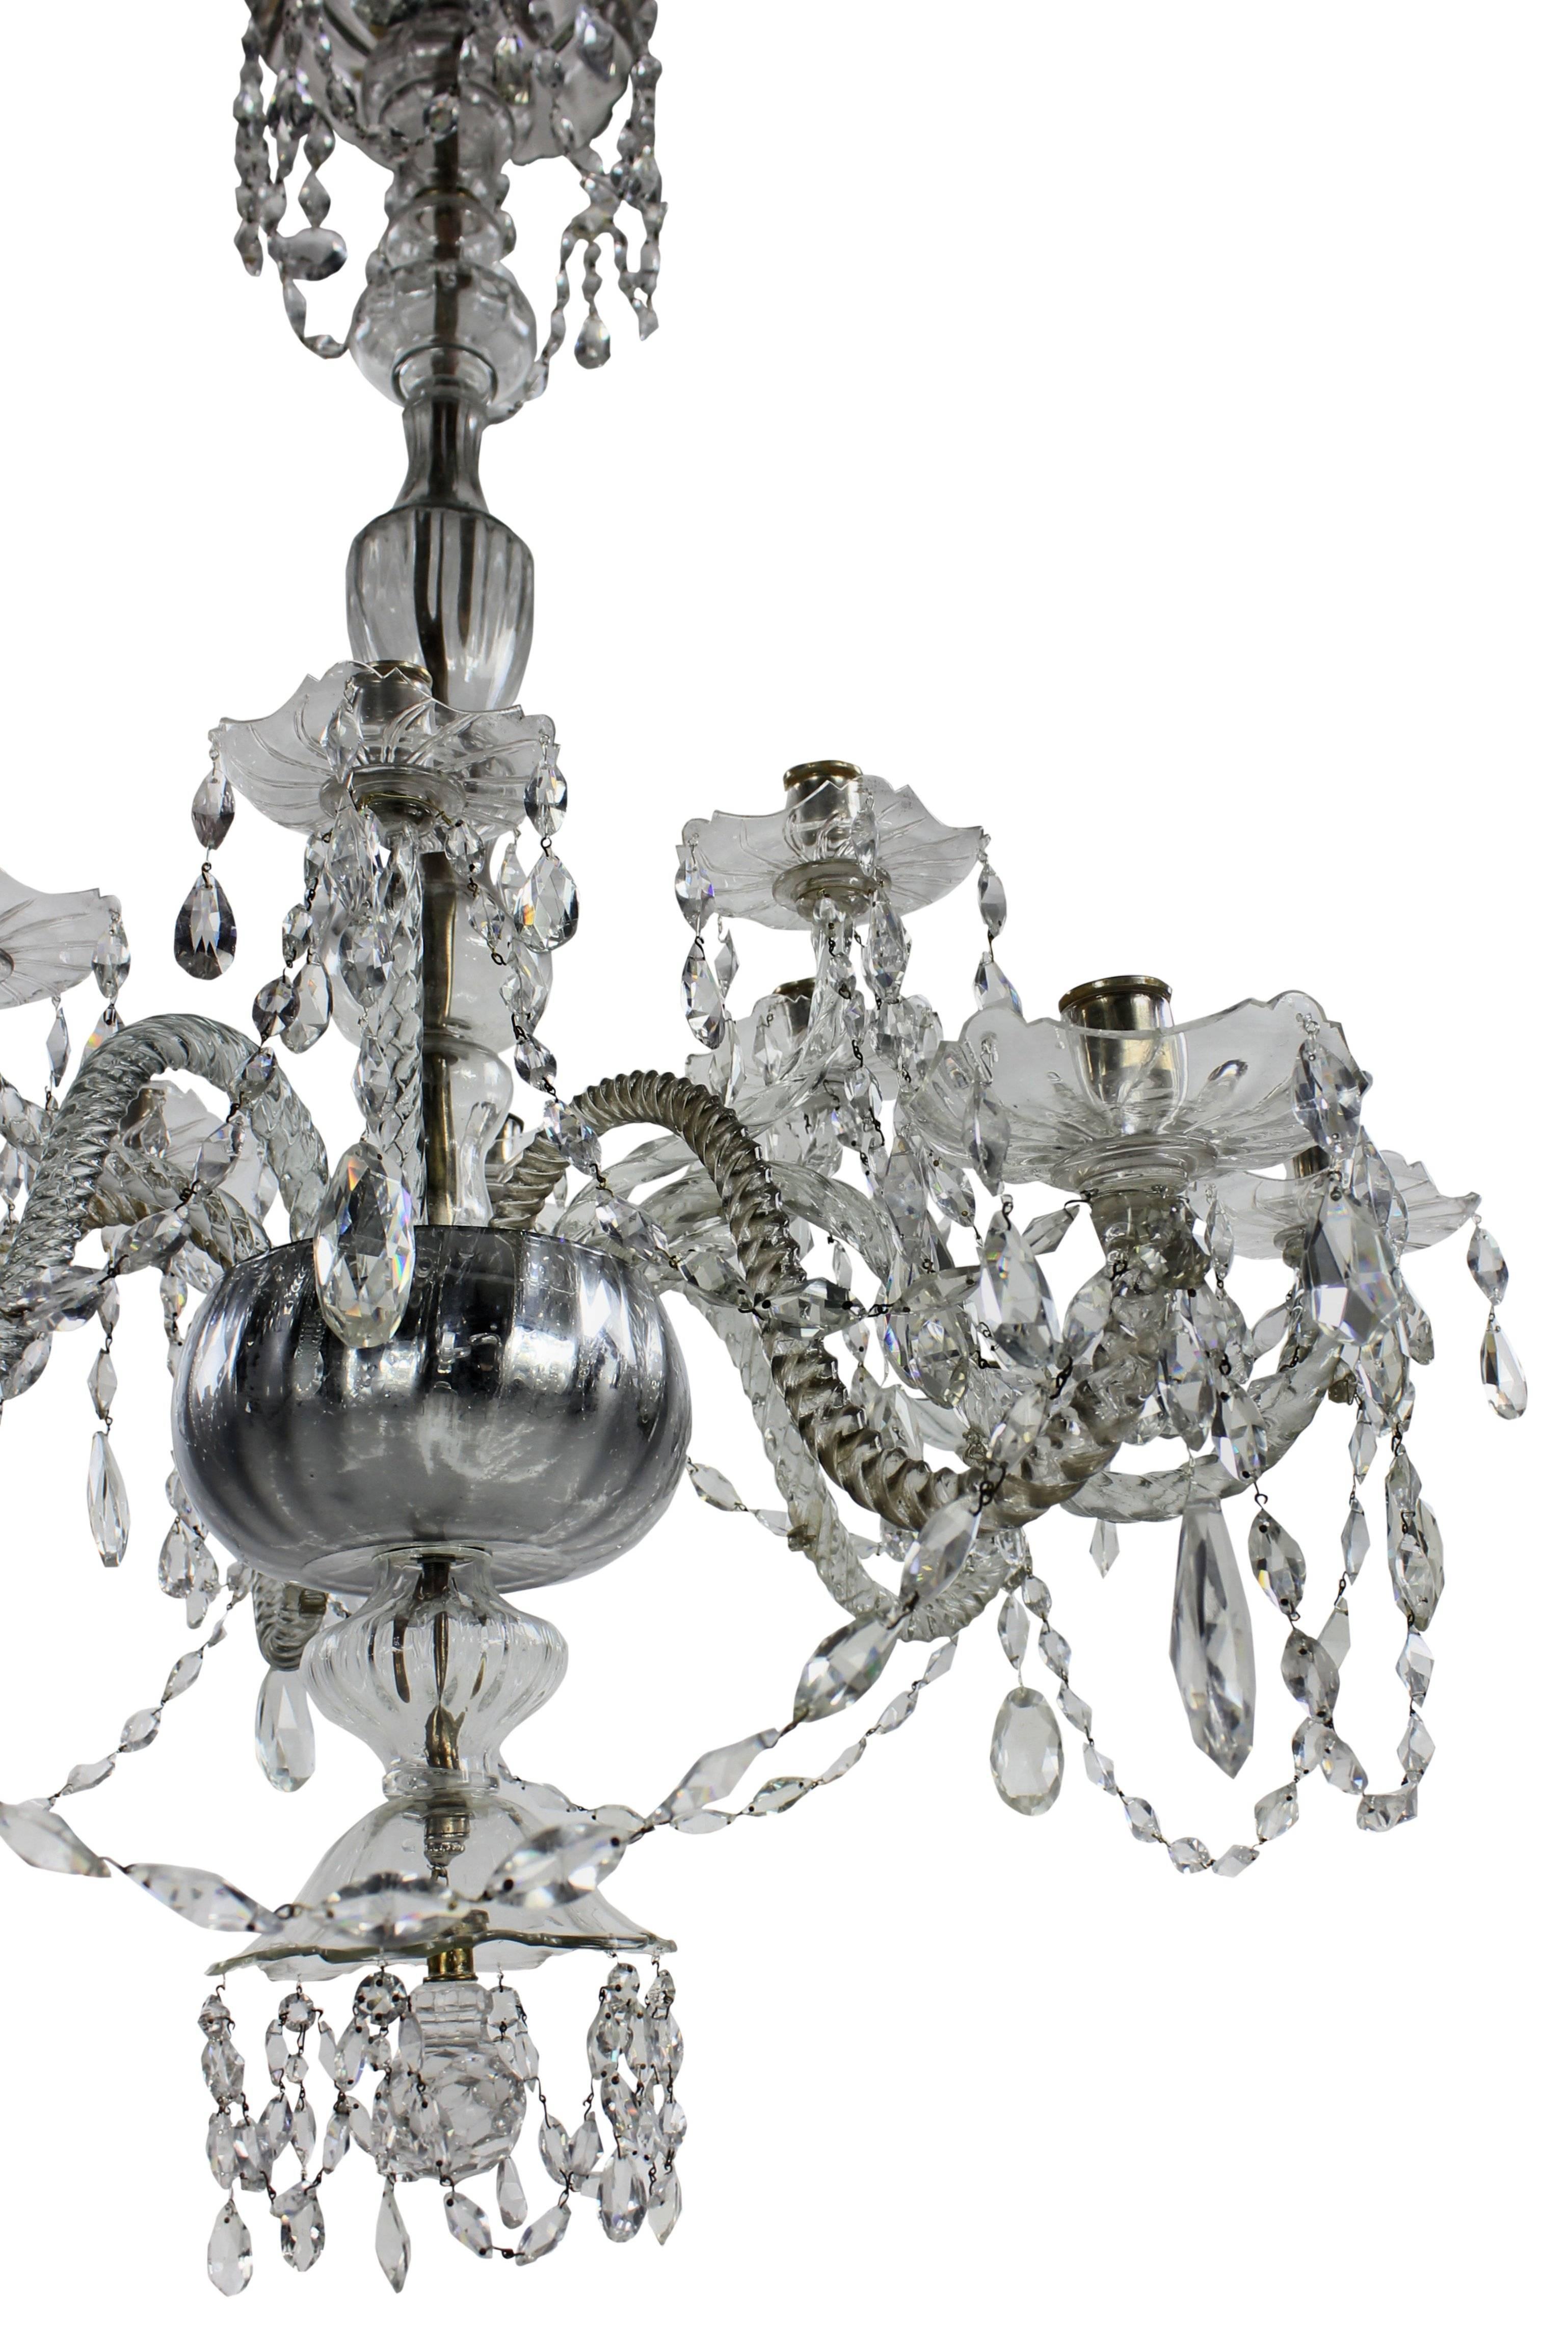 An early 19th century cut and blown glass Venetian chandelier of large proportions. With barley twist arms, moulded fluted drip pans, baluster, swags and lemon cut drops. With canopy and silvered receiver dish. With six down-swept arms and six